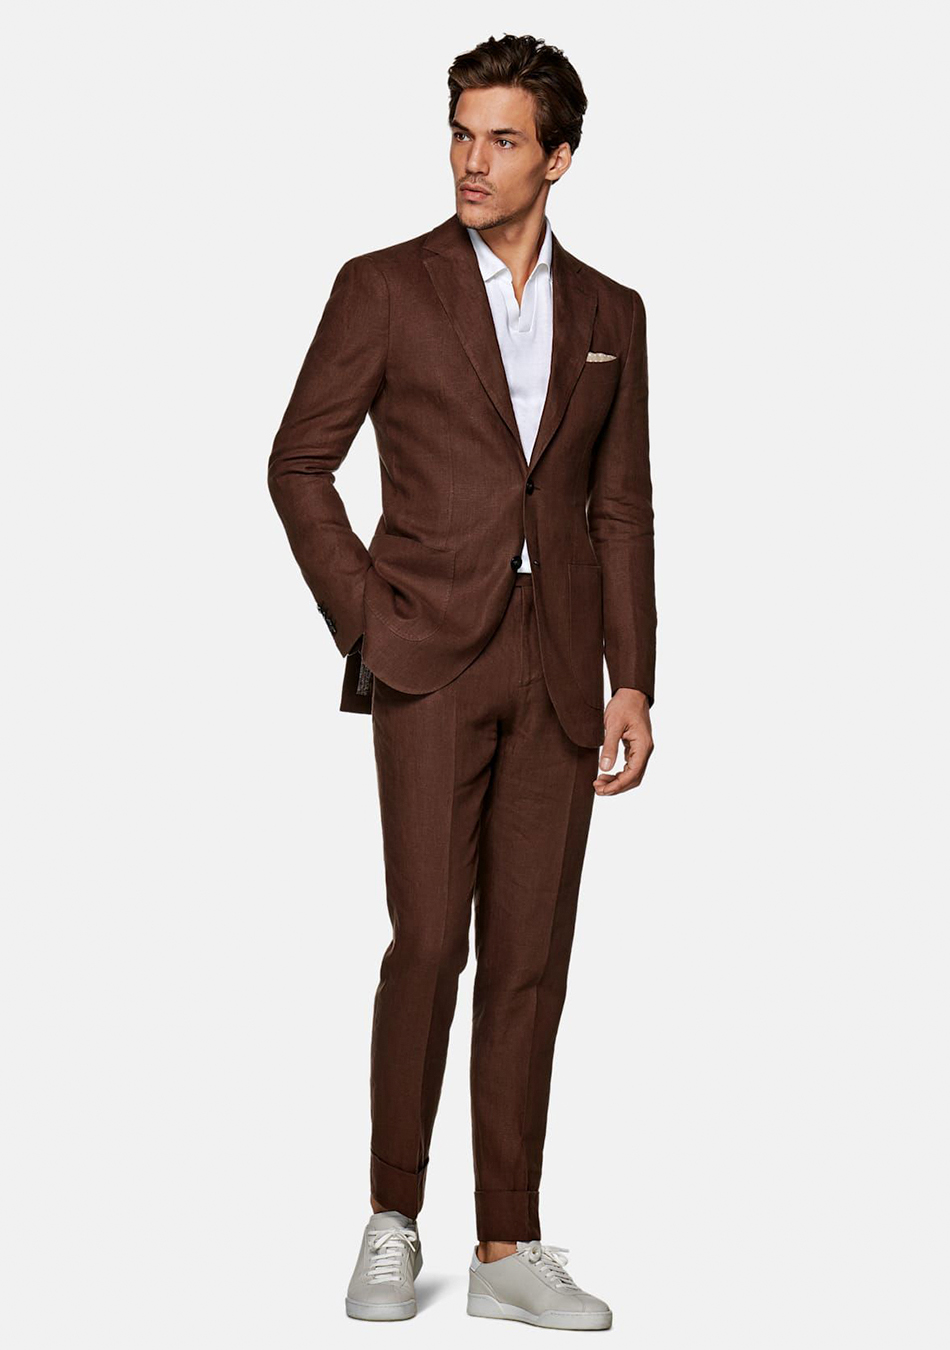 Brown suit, white polo t-shirt, and light grey sneakers